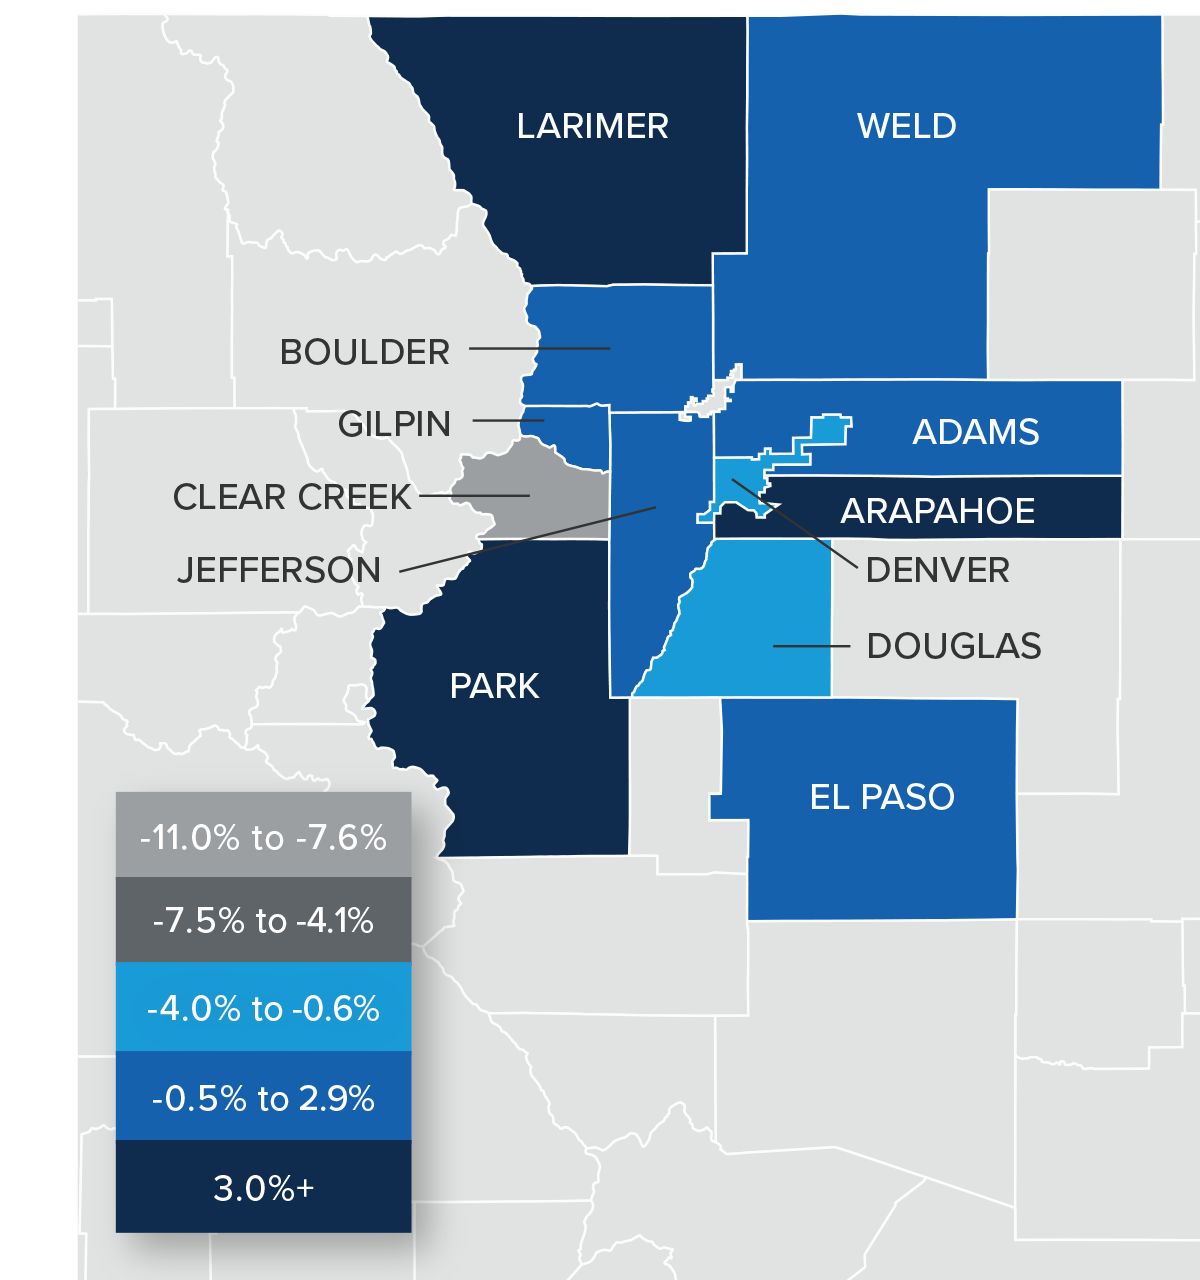 A map showing the real estate home prices percentage changes for various counties in Colorado. Different colors correspond to different tiers of percentage change. Larimer, Arapahoe, and Park had percentage changes above 3% and are represented in the corresponding navy color. Weld, Boulder, Gilpin, Adams, Jefferson, and El Paso were in the -.5% to 2.9% range. Denver and Douglas were in the -4% to -.06%. Clear Creek was in the -11% to -7.9% range and is represented in the light grey color on the map. 